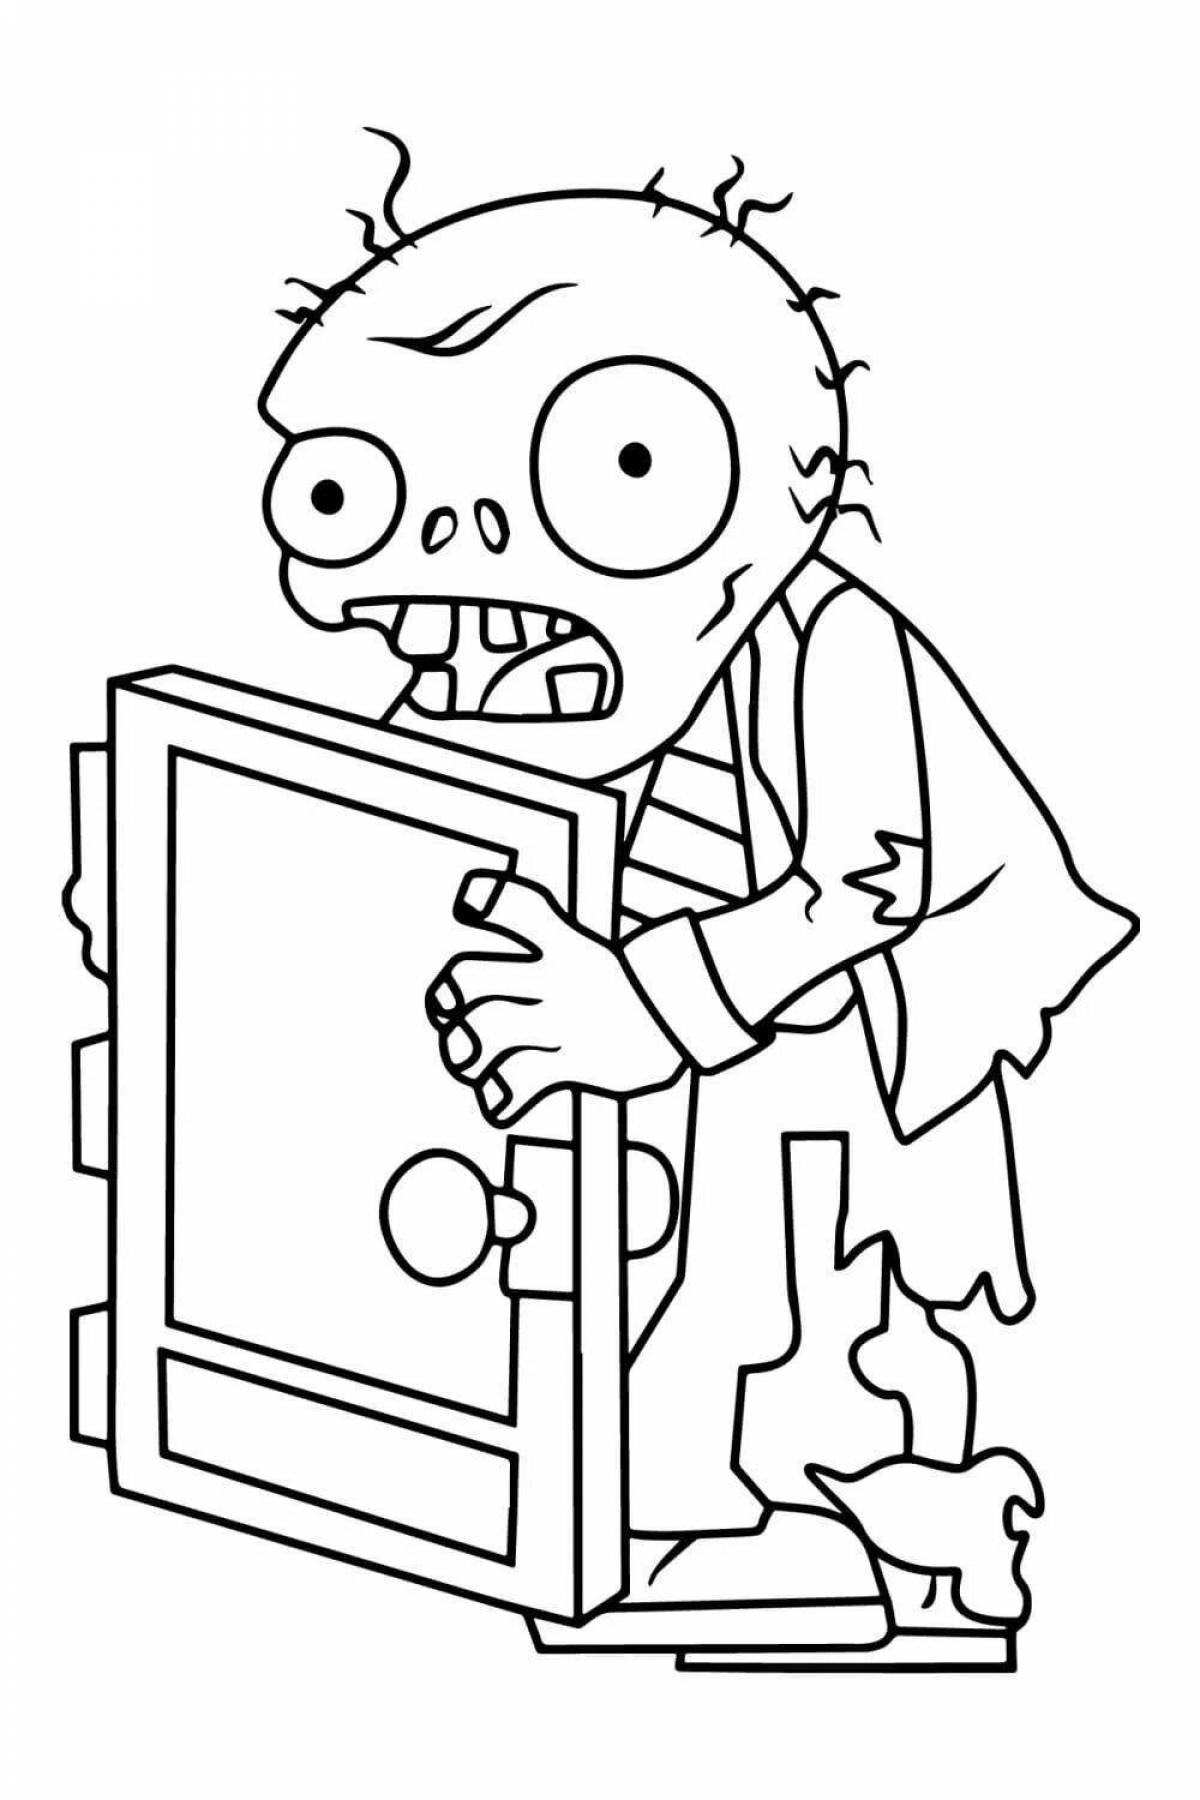 Frightening zombie coloring page